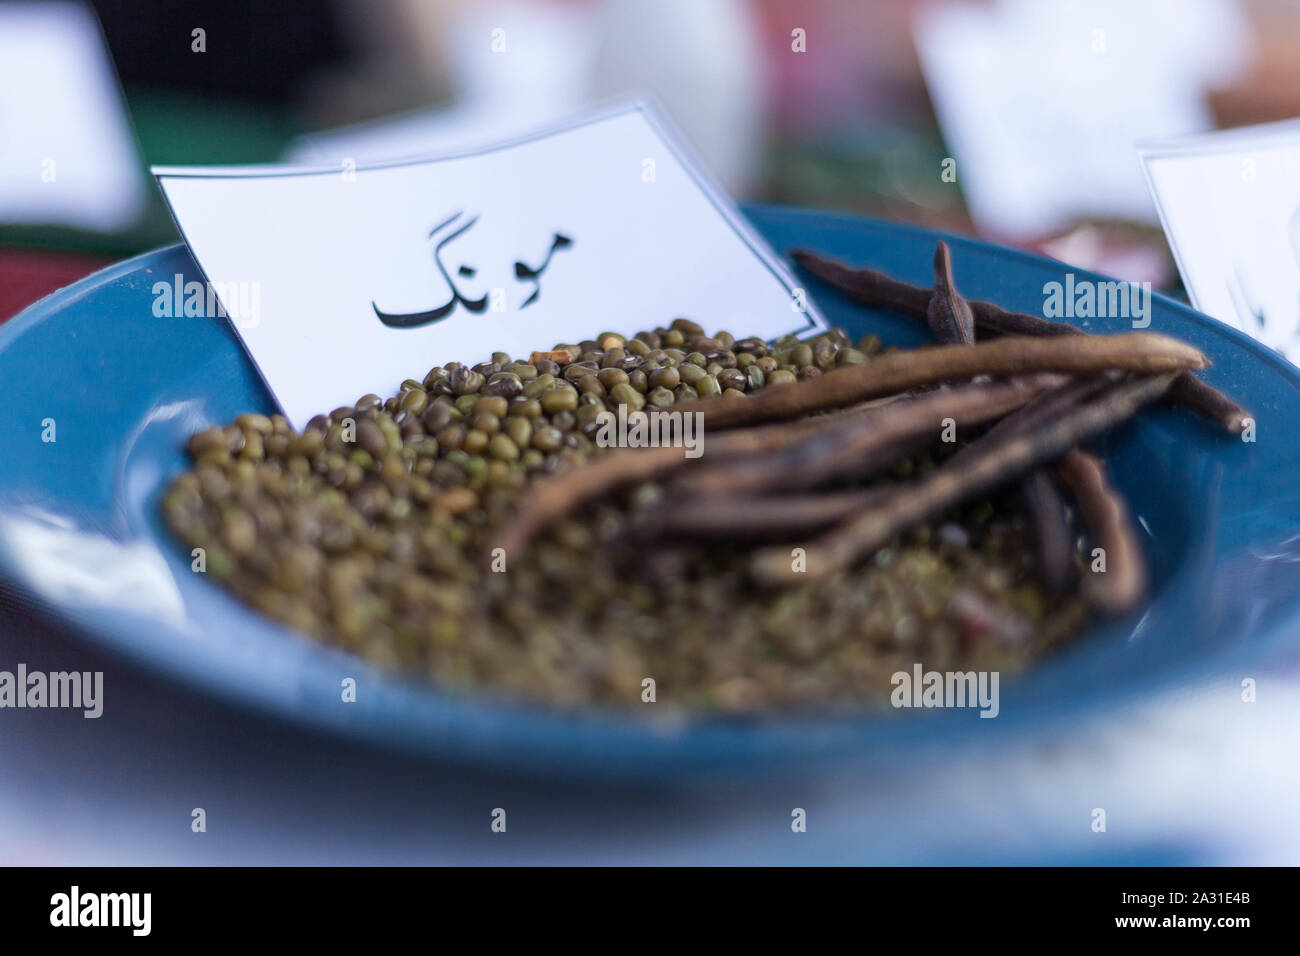 The mung bean, alternatively known as the green gram, maash, or moong, is a plant species in the legume family. Stock Photo